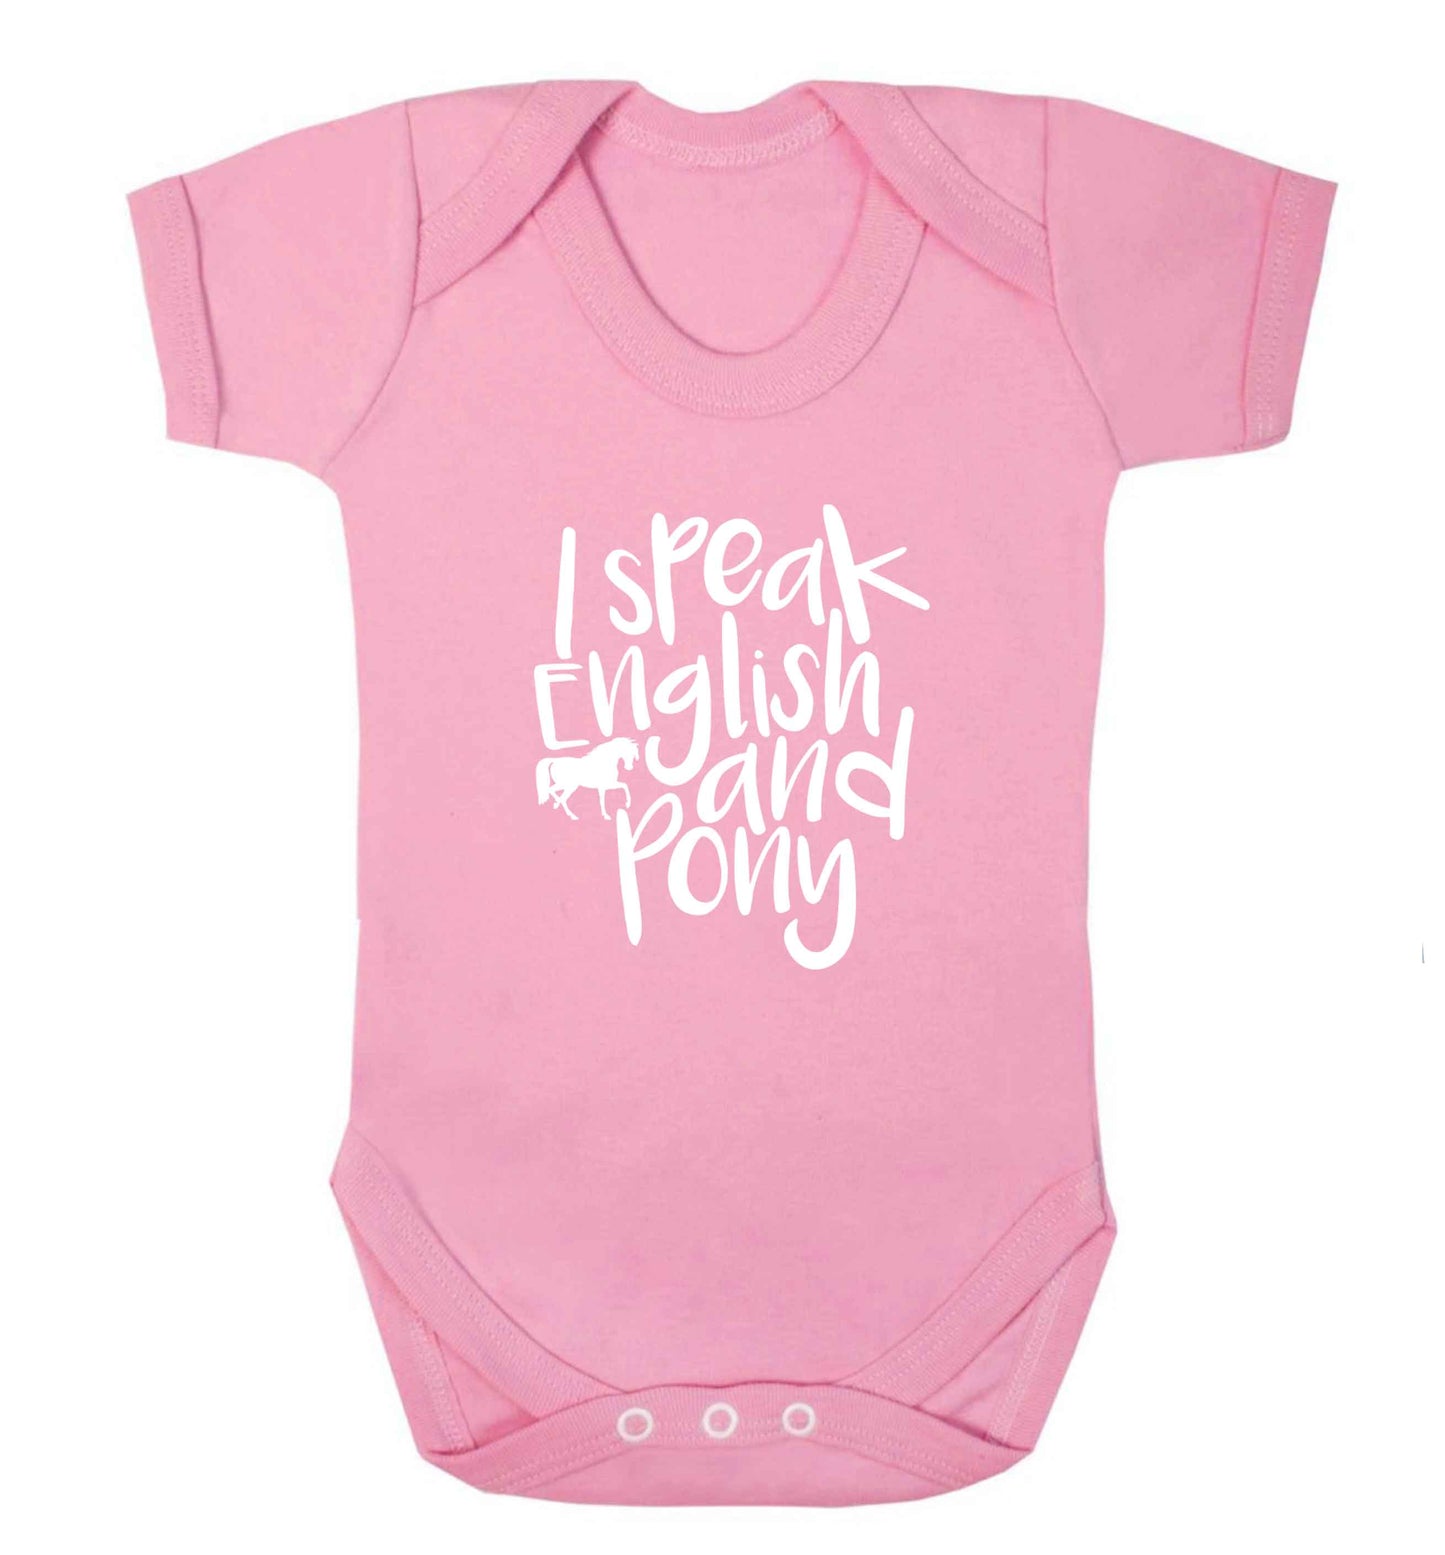 I speak English and pony baby vest pale pink 18-24 months